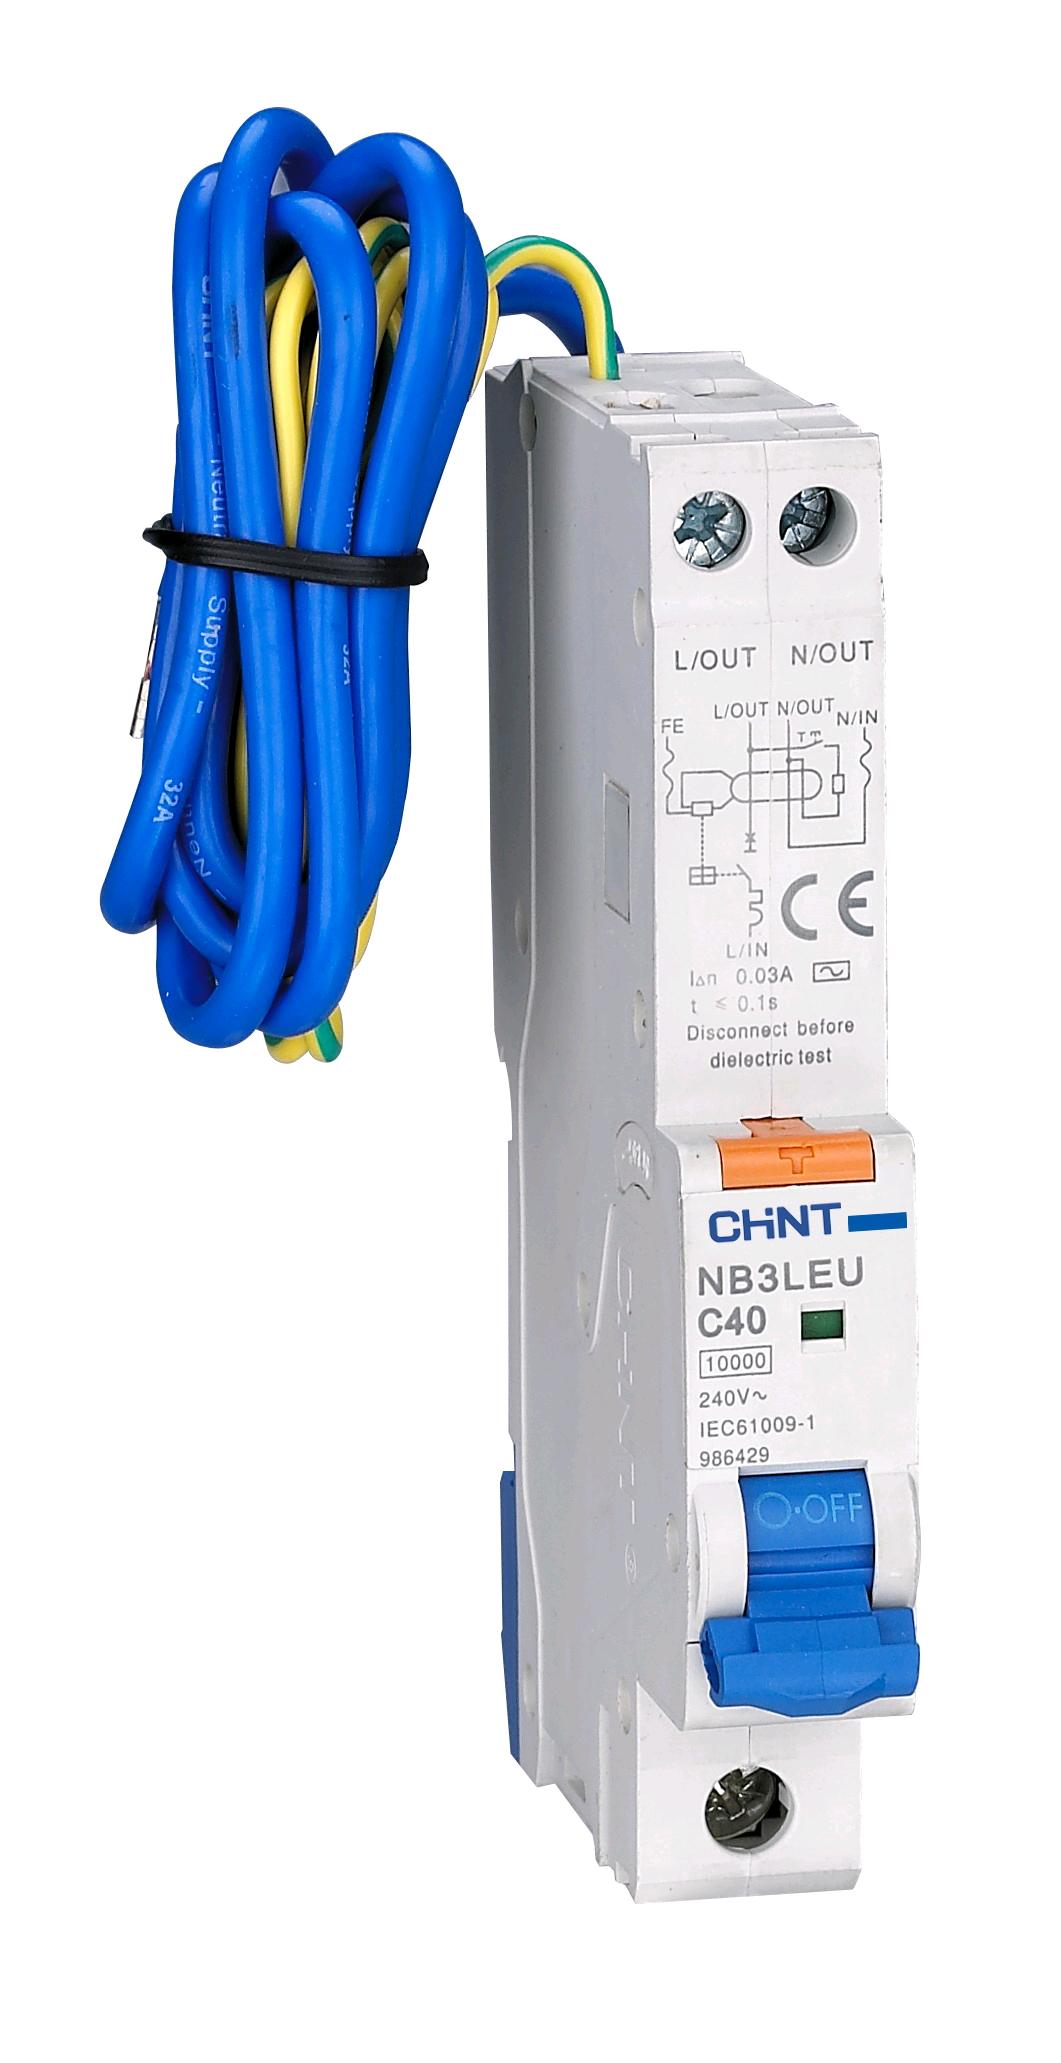 Chint 40a 30mA RCBO "C" Rated 